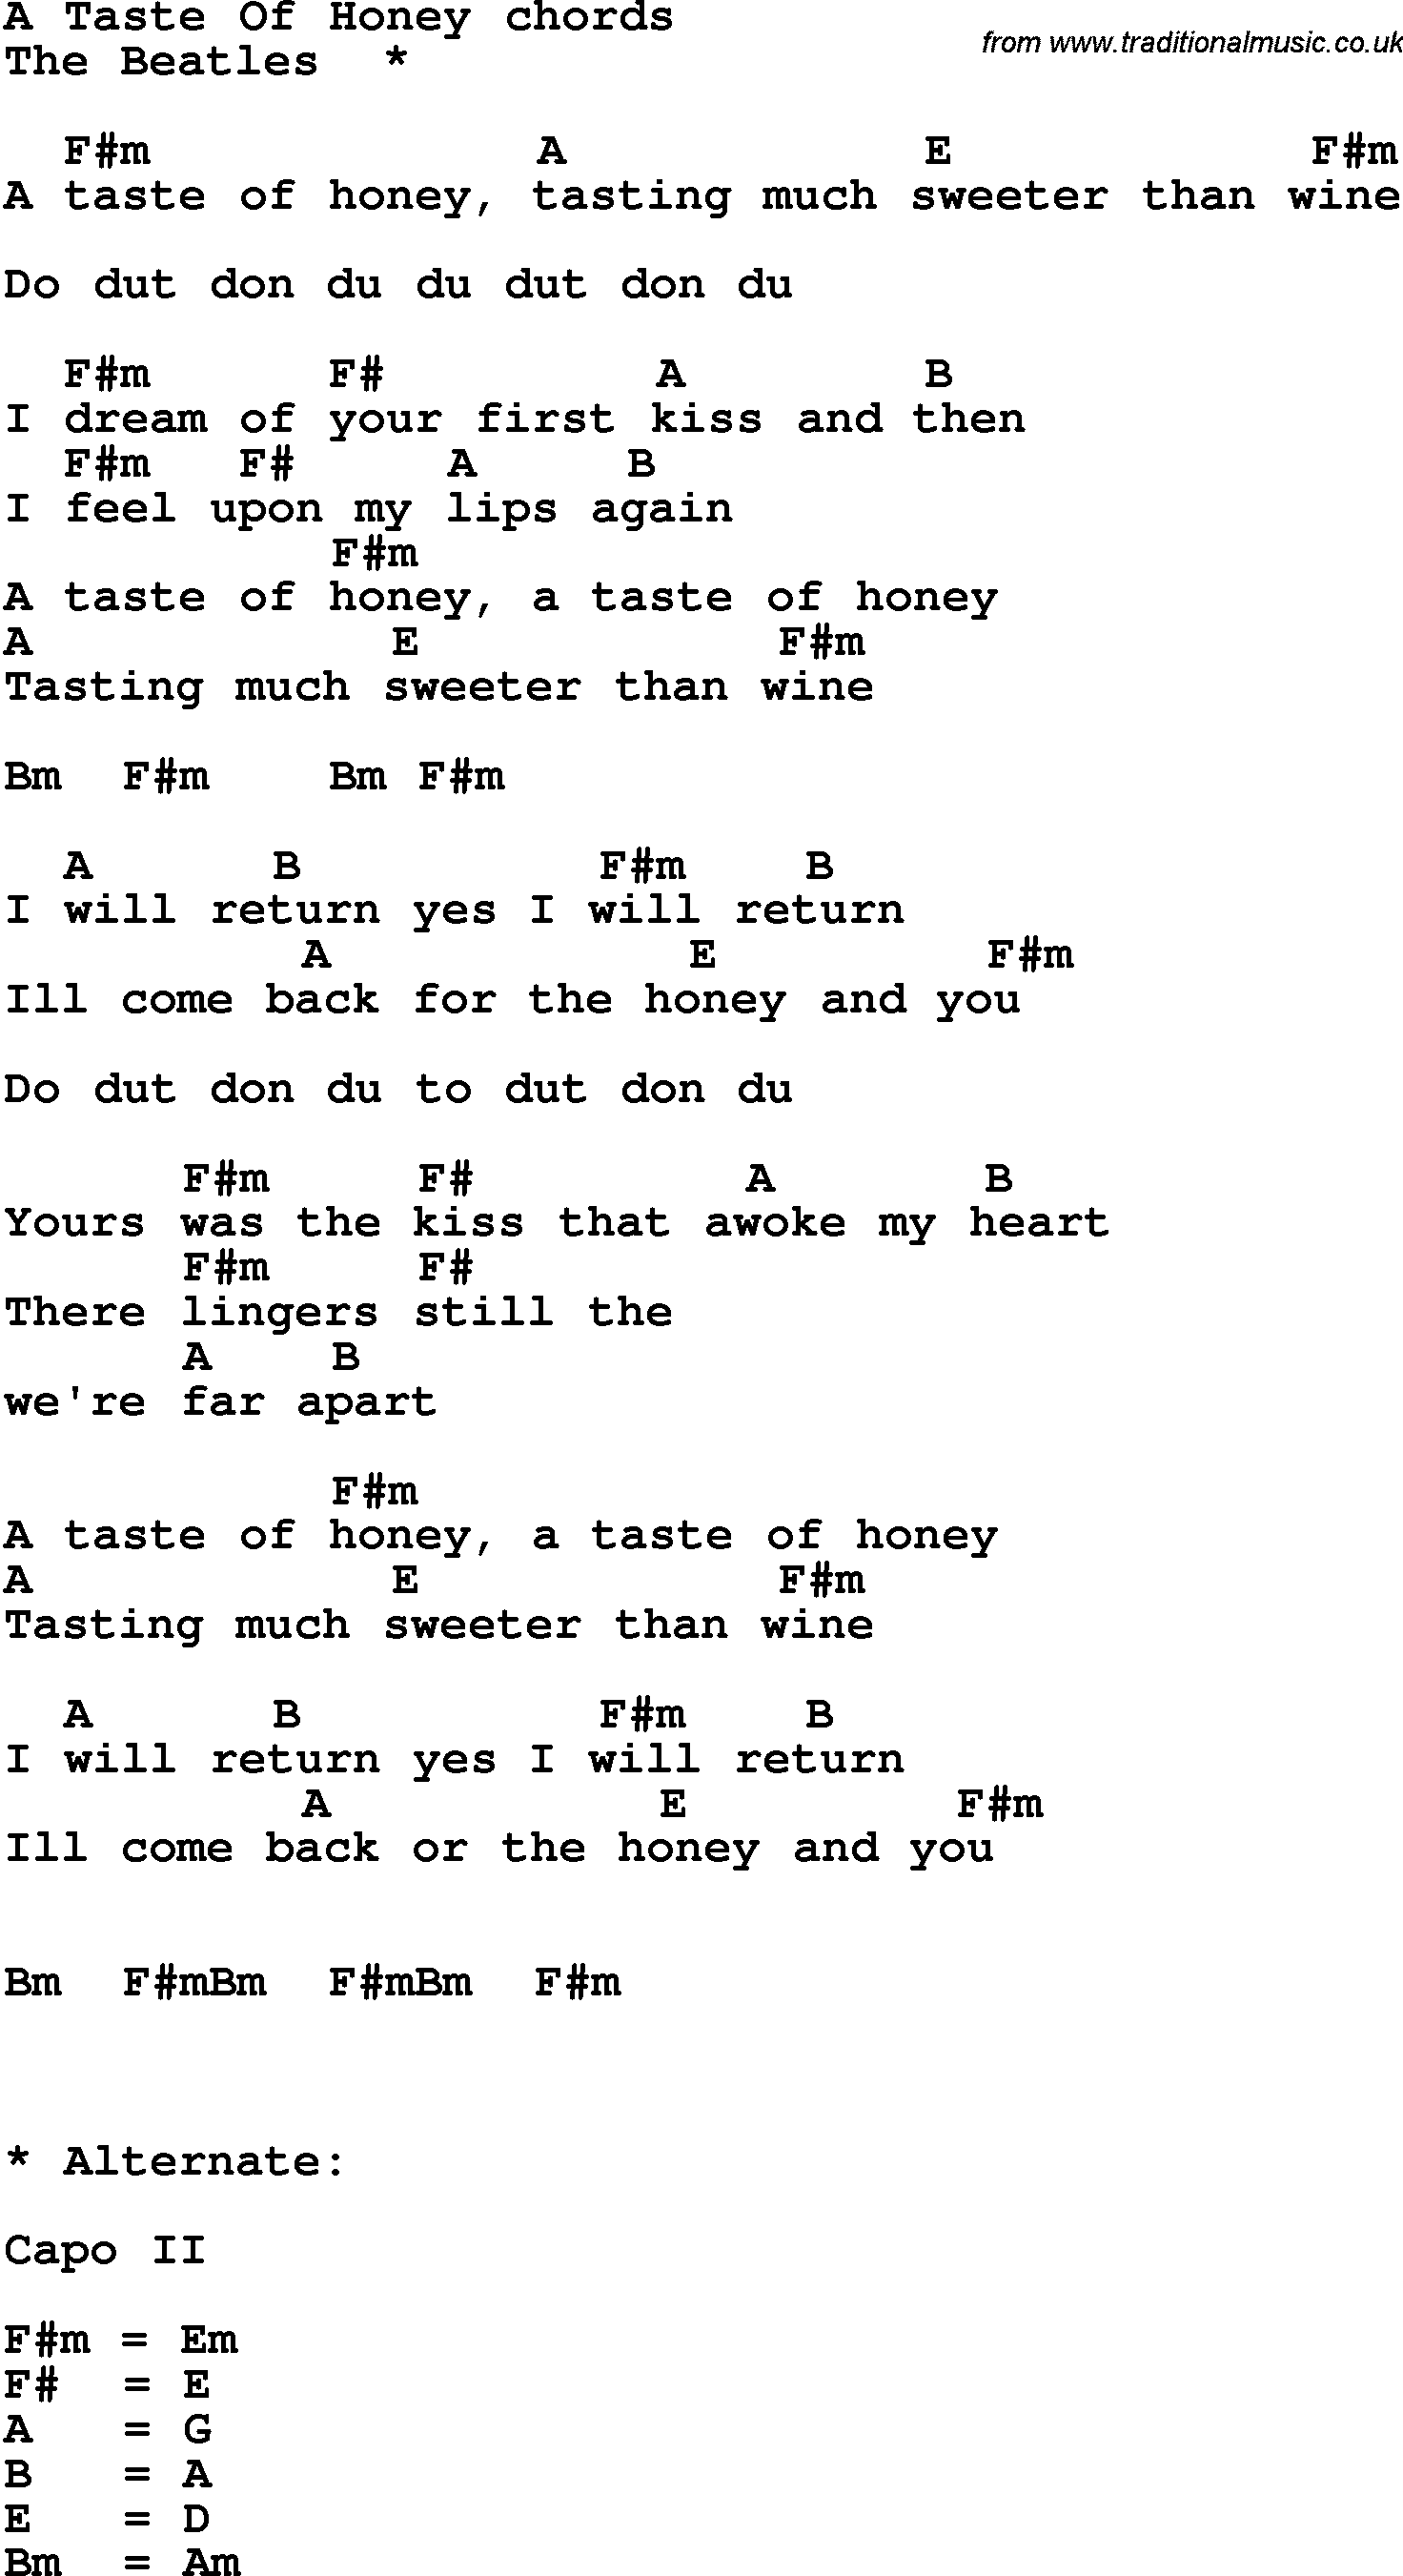 Song Lyrics with guitar chords for A Taste Of Honey - The Beatles